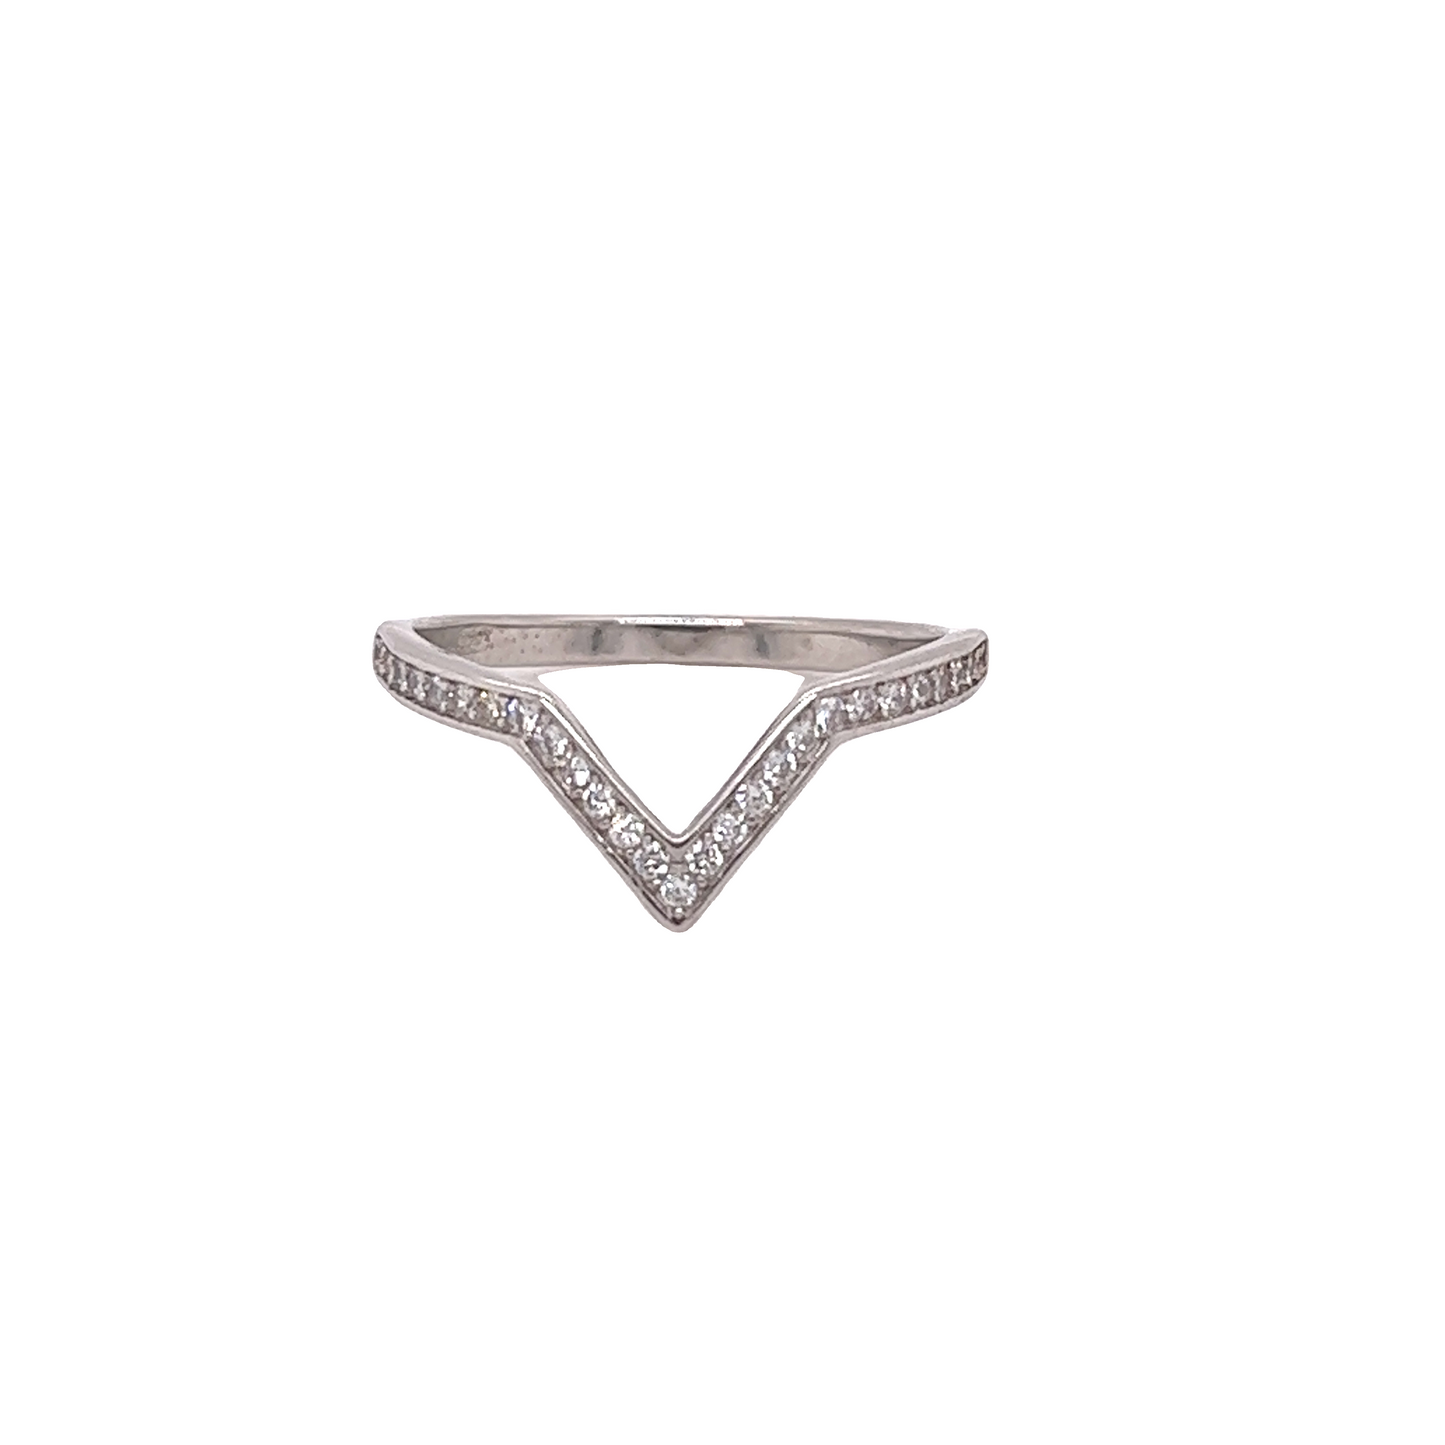 An elegant Channel Set Cubic Zirconia Chevron Ring with a cubic zirconia on a white background.